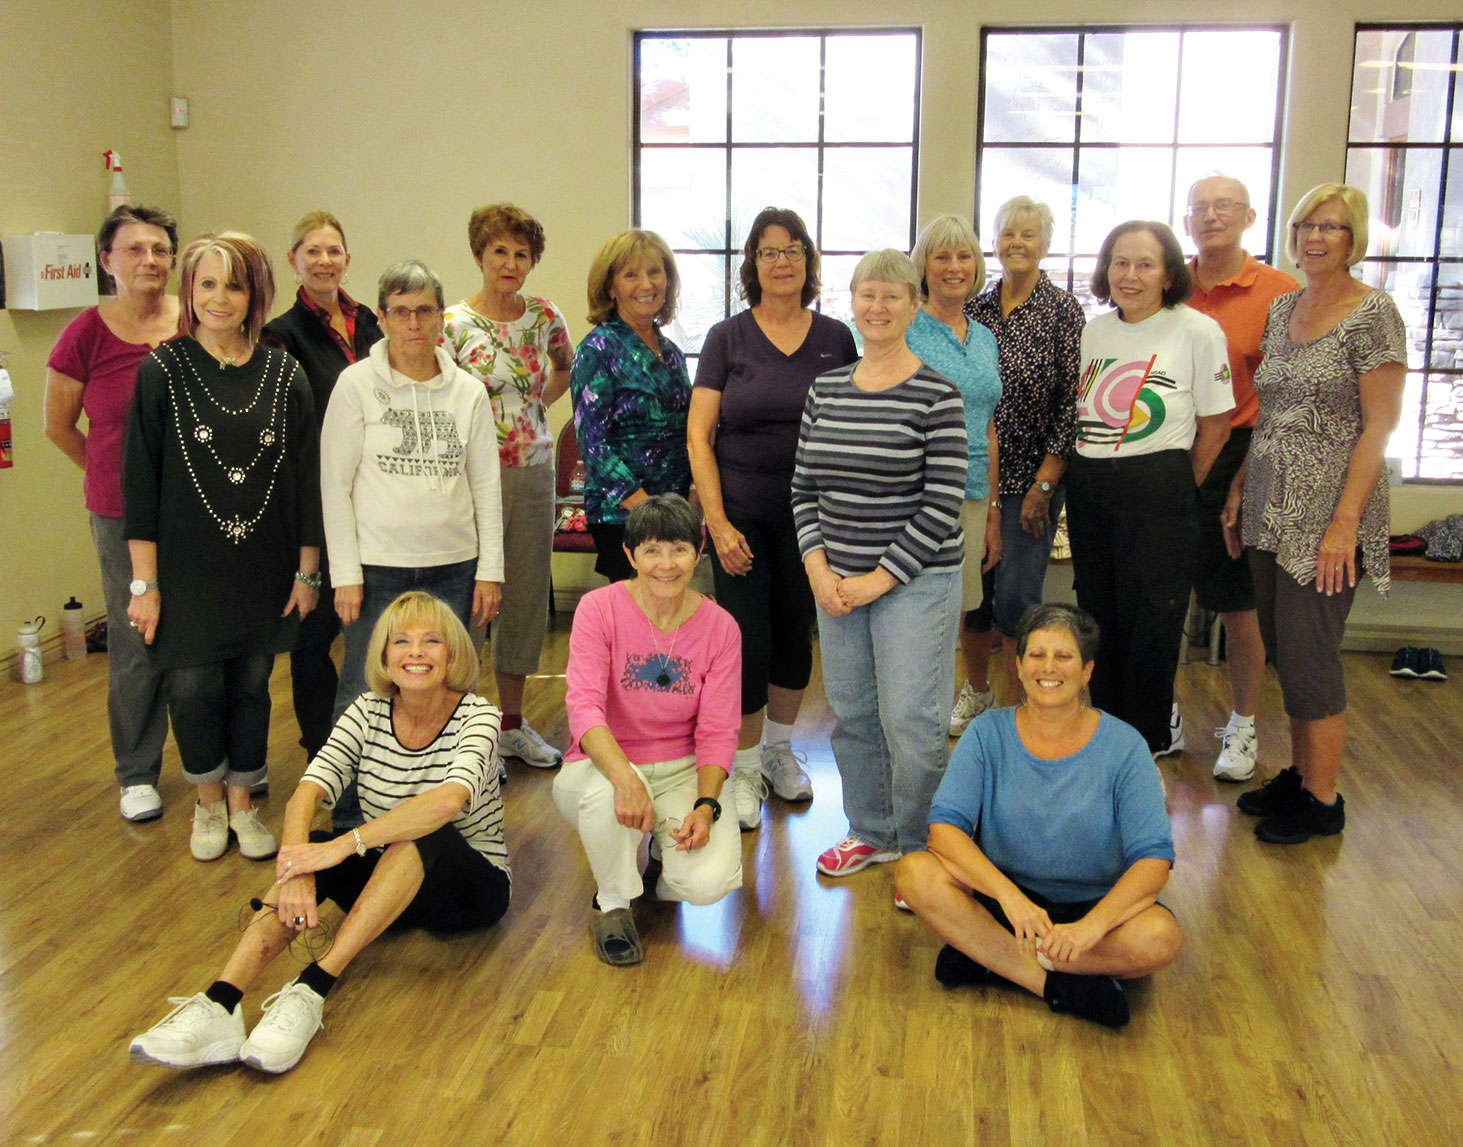 One-third of this class is from SaddleBrooke Ranch. This is the Level 3 class with justifiably happy smiles of accomplishment. They are line dancers performing the most challenging dances in our SaddleBrooke/Ranch classes and enjoying learning with exercise.